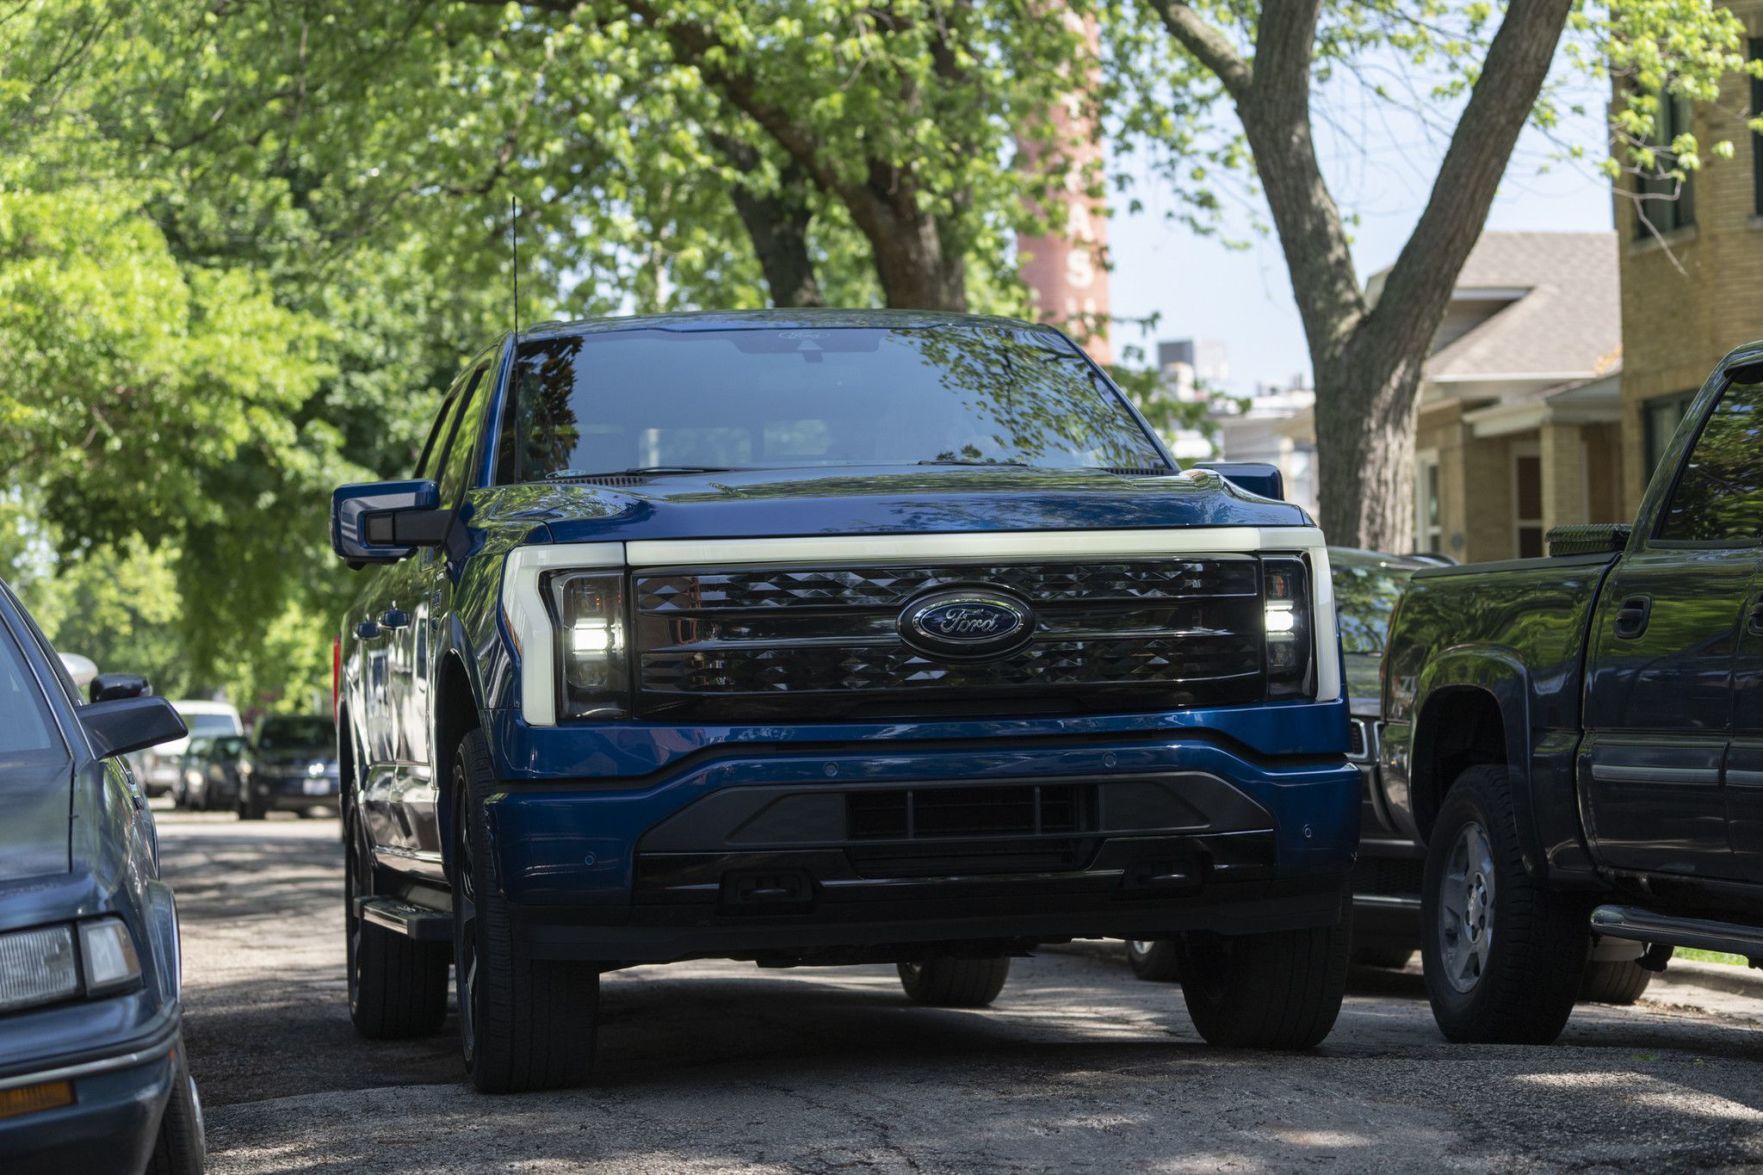 The first peek at the 2022 Ford F-150 Lightning.    PHOTO CREDIT: Tribune News Service